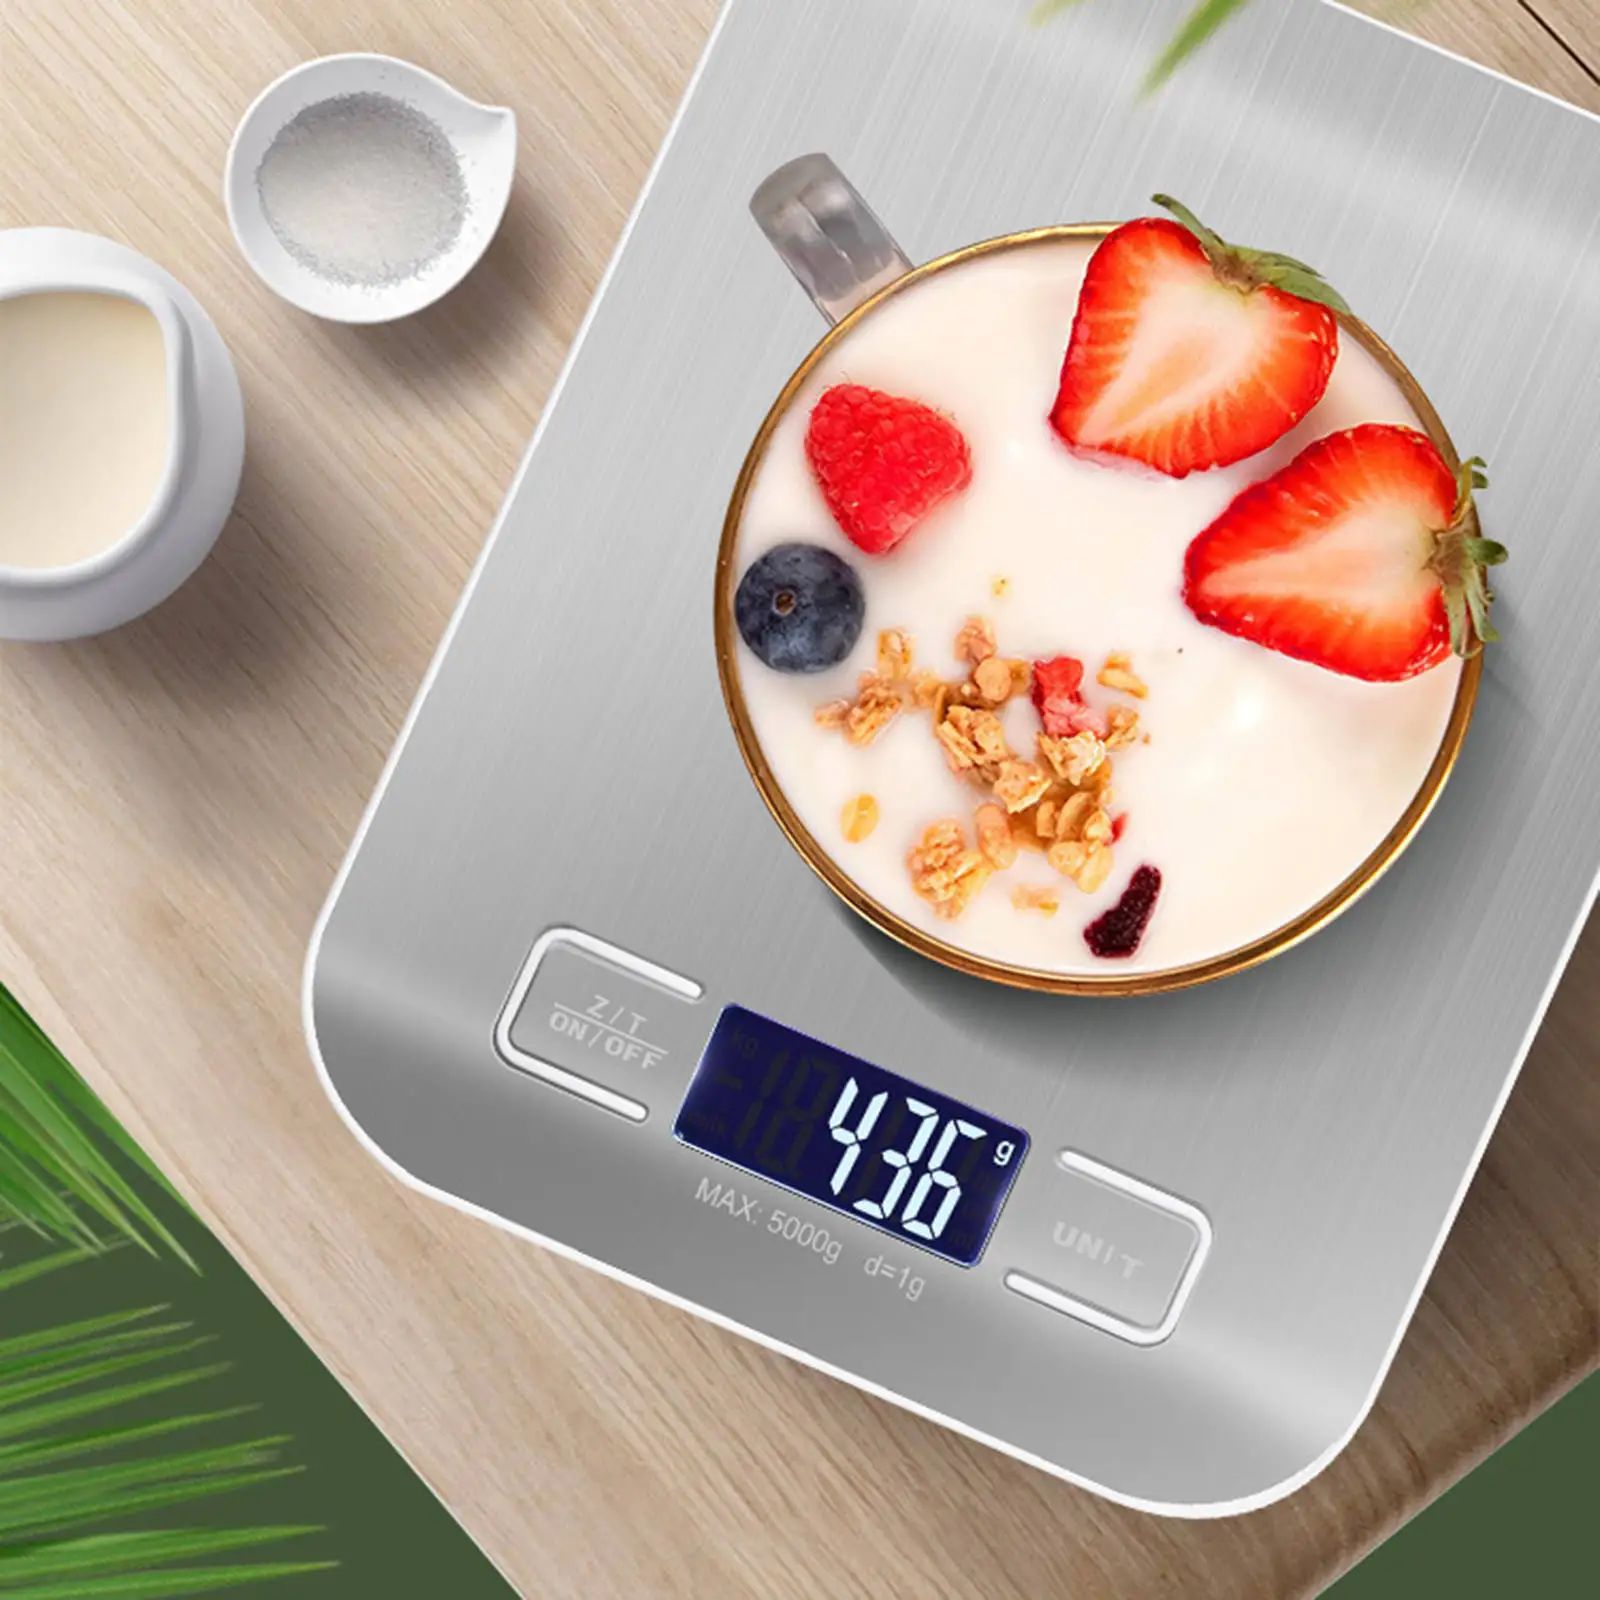 Portable Digital kitchen Scales 5kg 10kg/1g Stainless Steel LCD Electronic Food Diet Postal Balance Measure Tools weight Libra